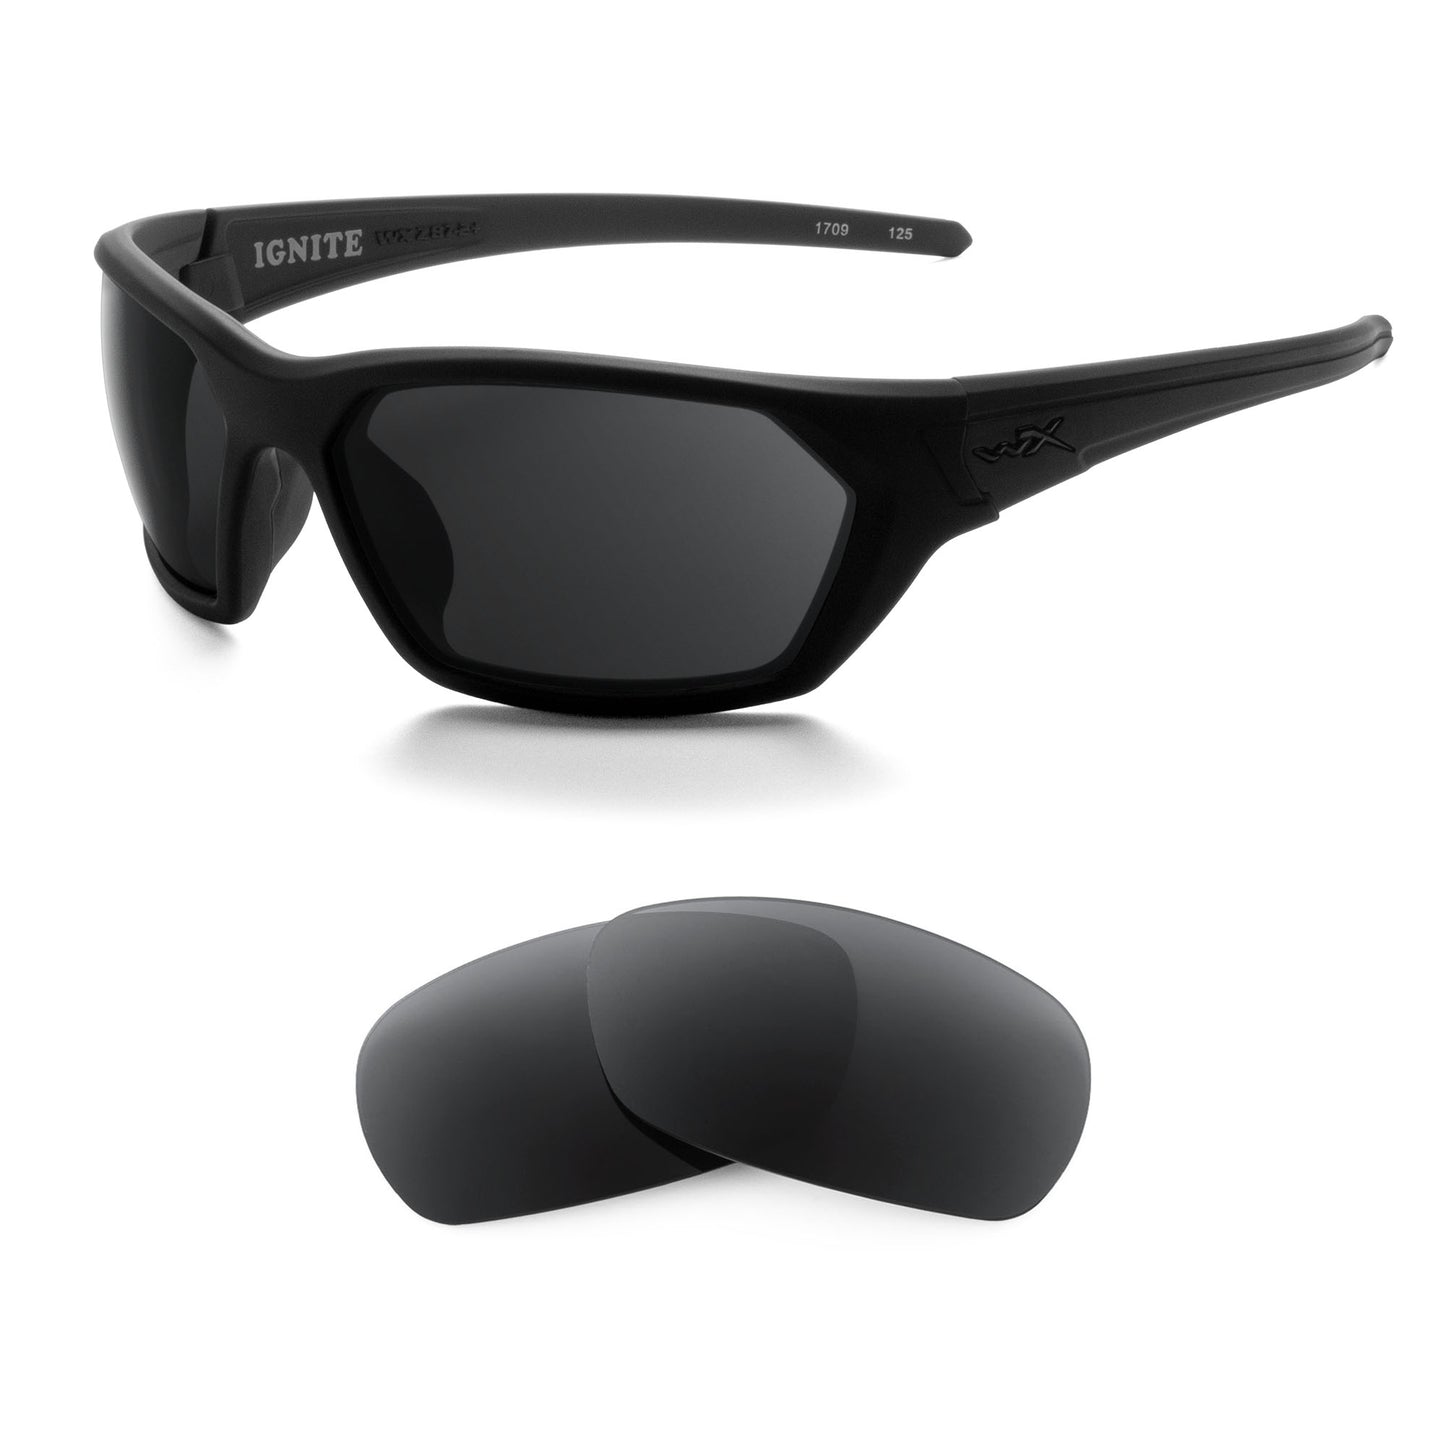 Wiley X Ignite sunglasses with replacement lenses